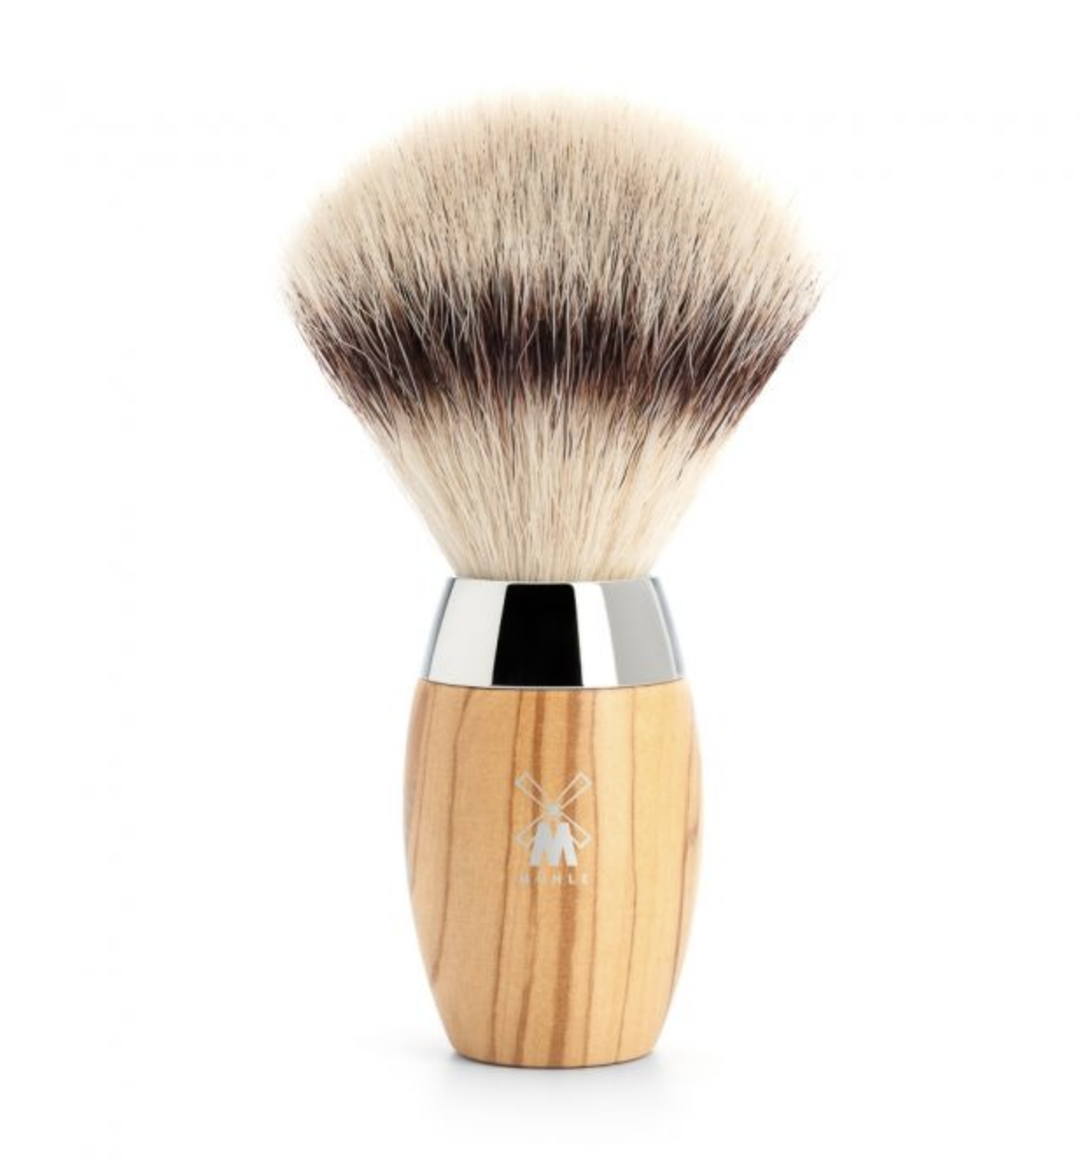 Muhle Kosmo Silvertip Fibre Shaving Brush in Olive Wood | Buster McGee Daylesford